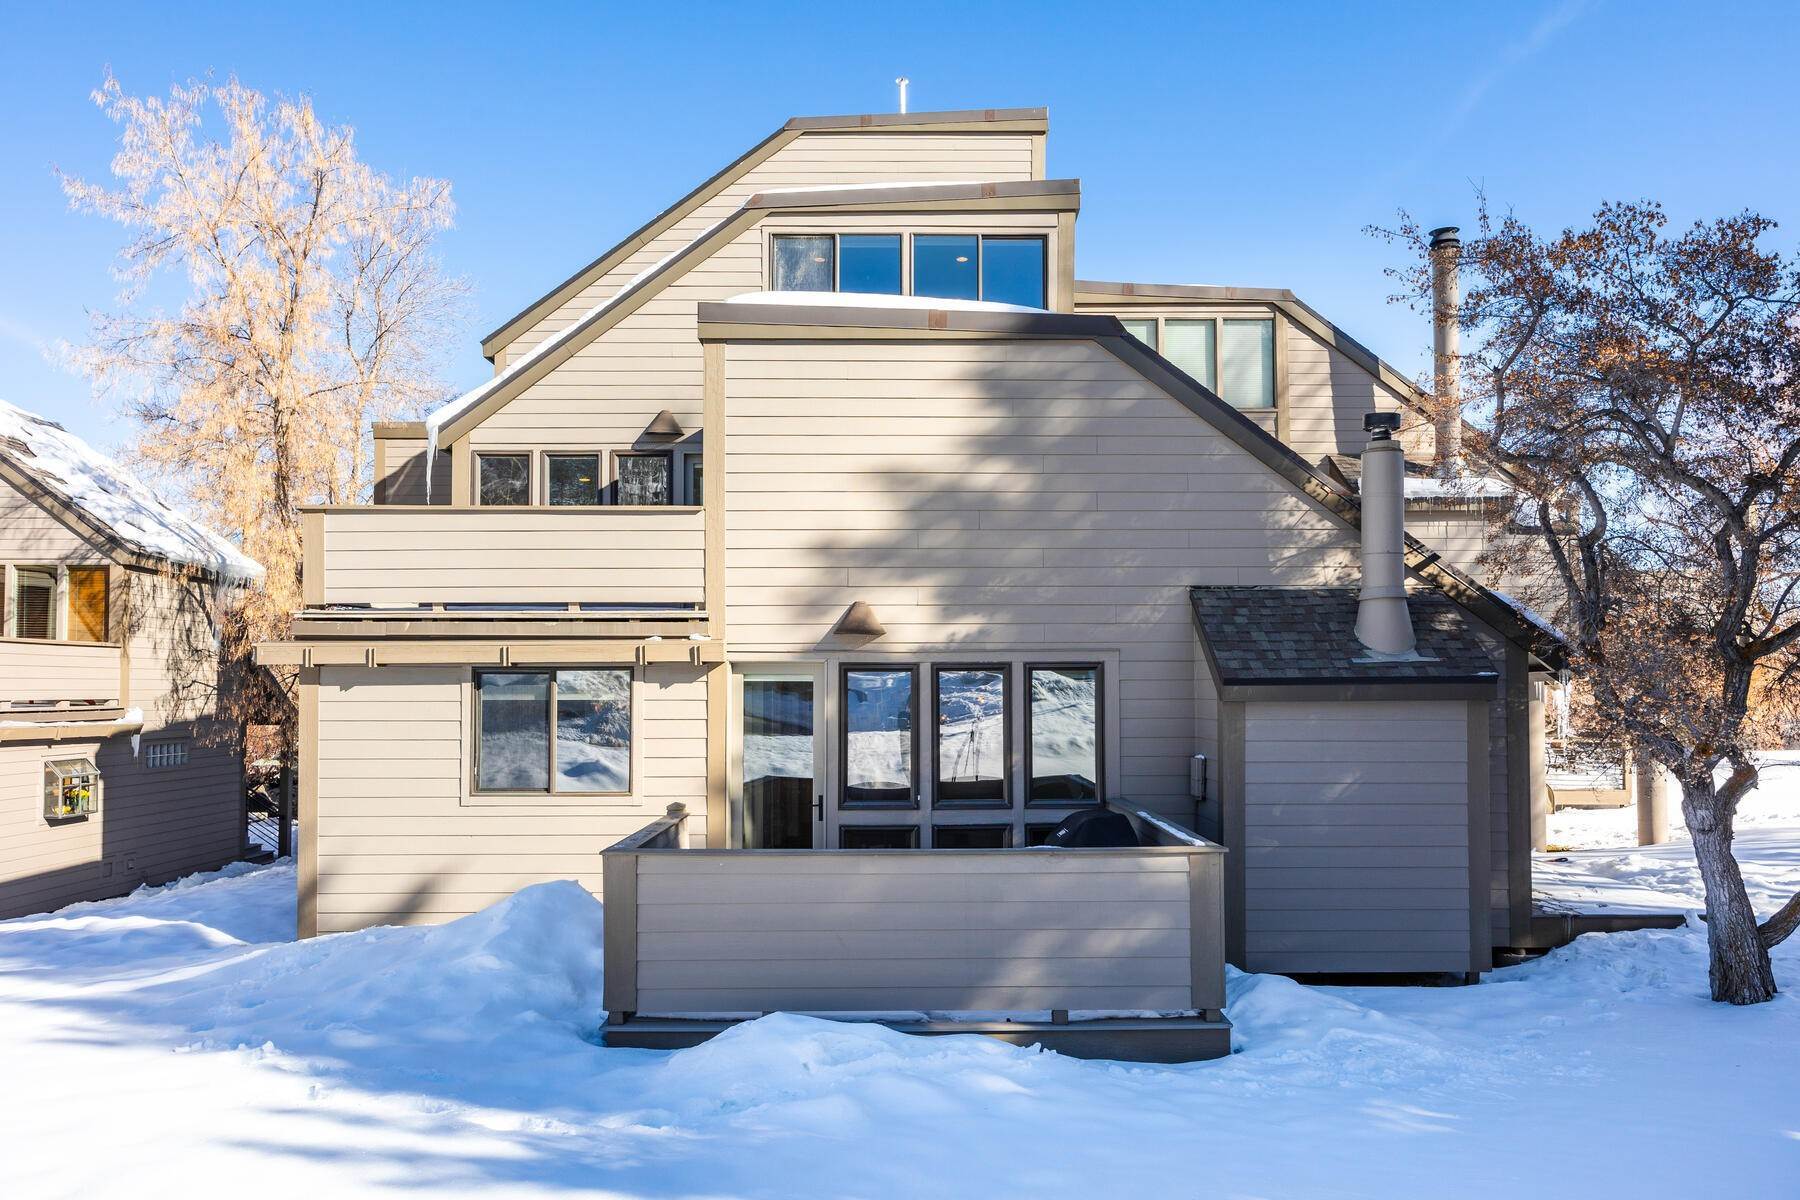 1. Condominiums for Sale at Beautifully Remodeled, Turn-Key, In-Town Townhome with Incredible Ski/Golf Views 1660 Three Kings Dr Unit 204 Park City, Utah 84060 United States